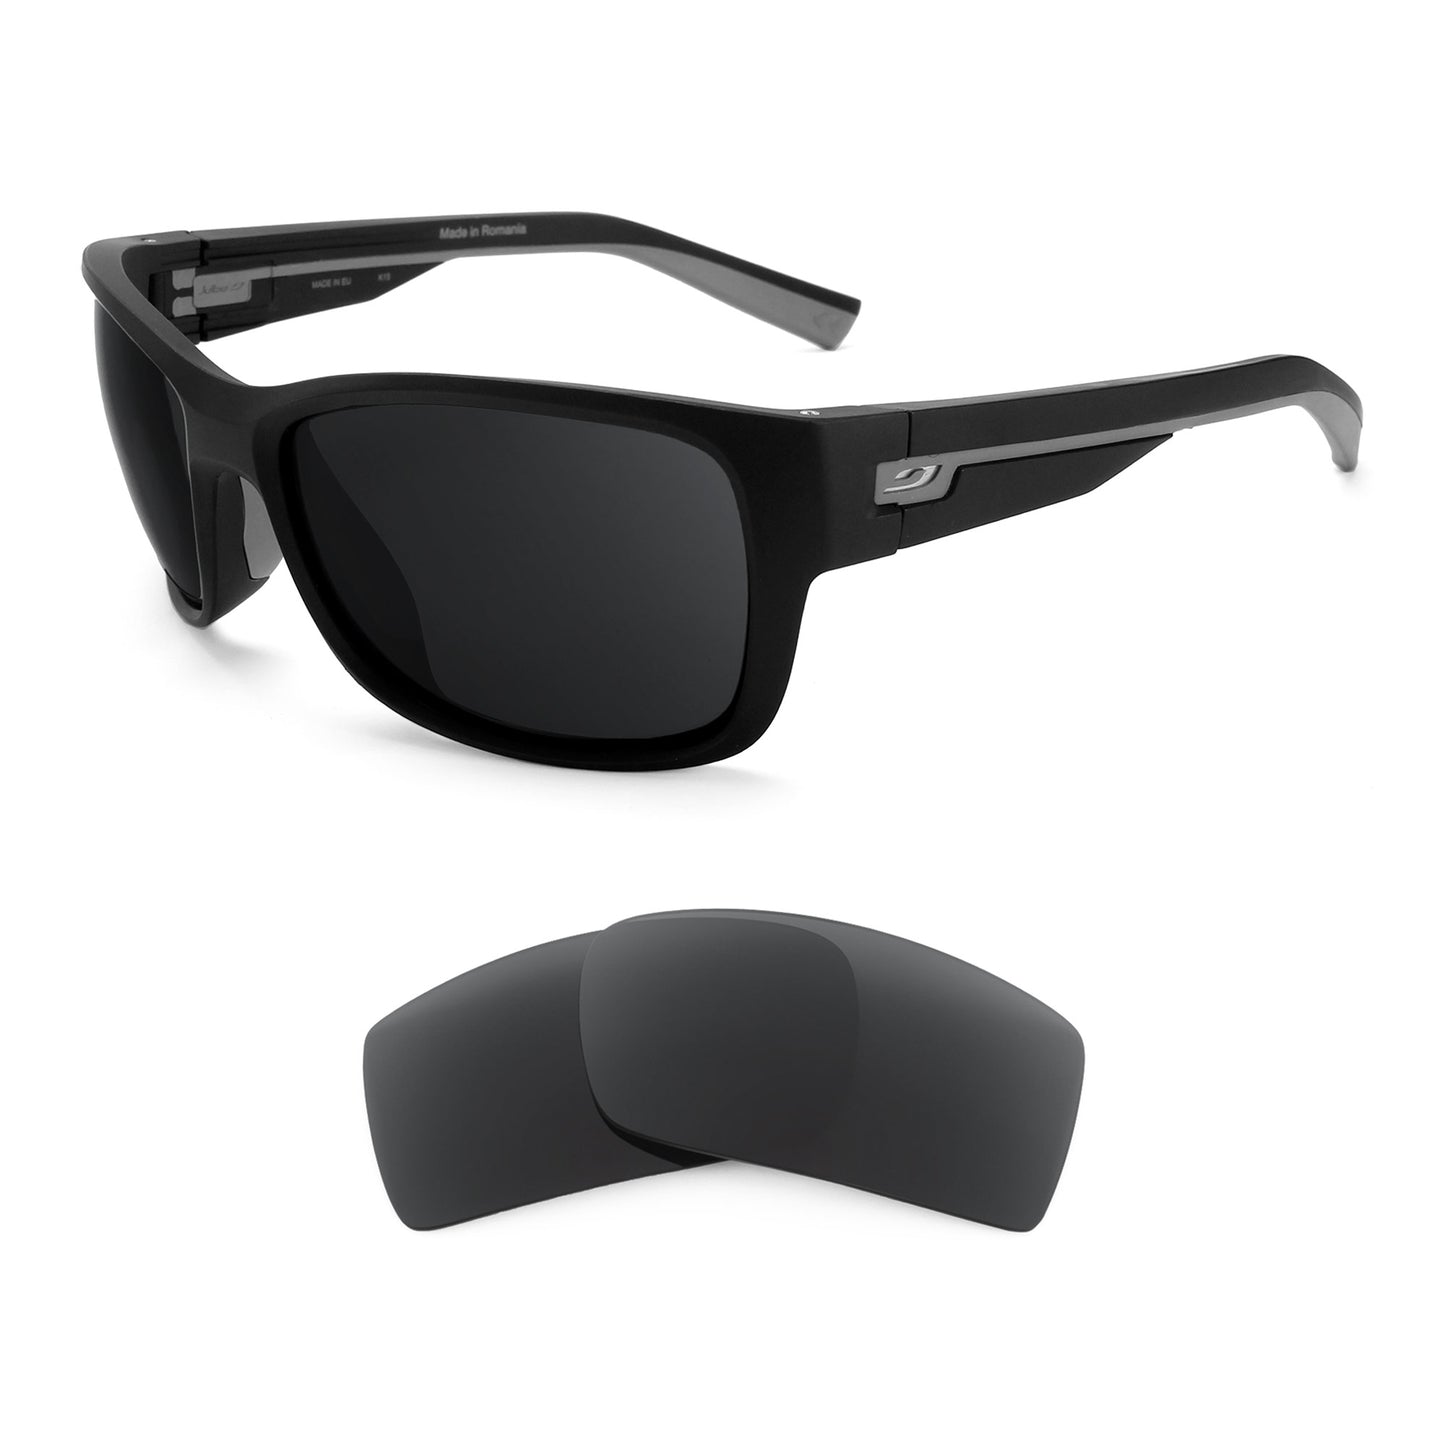 Julbo Drift sunglasses with replacement lenses